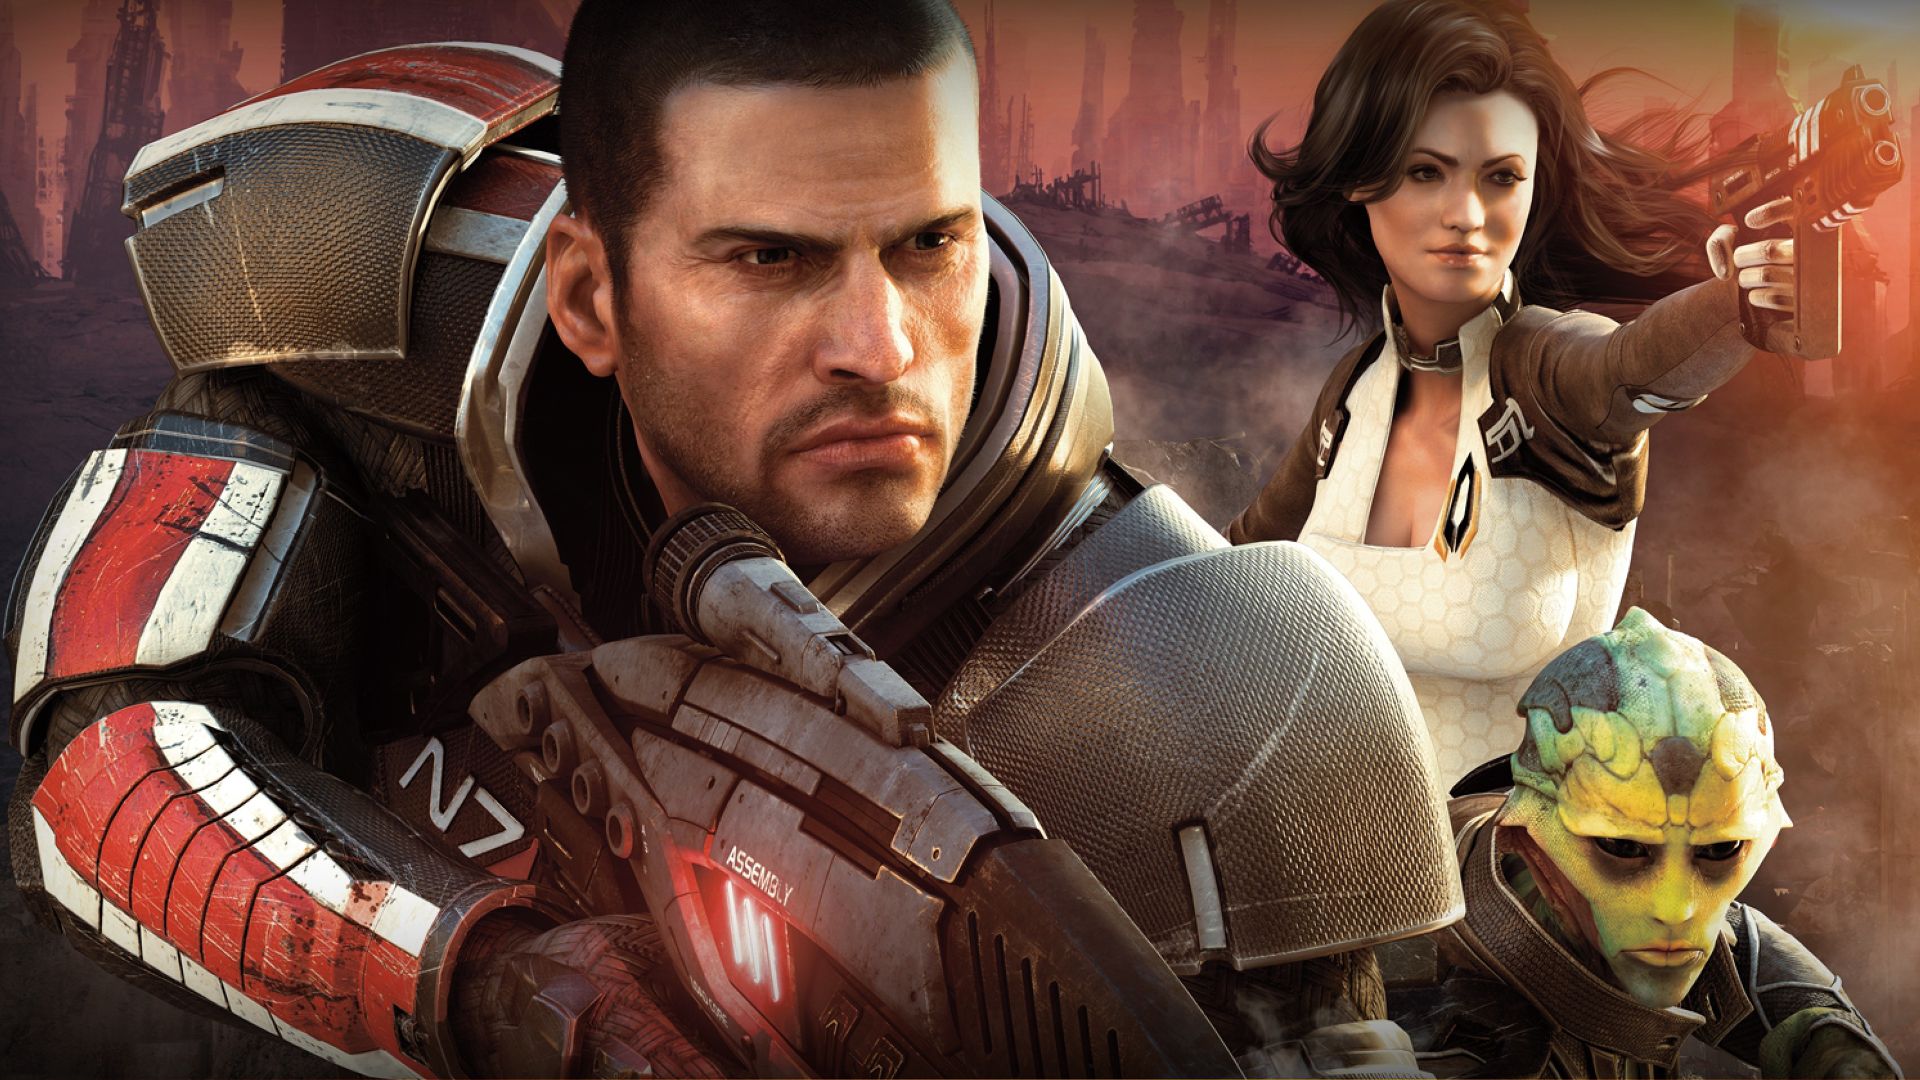 Image for EA working on Mass Effect trilogy remaster - report